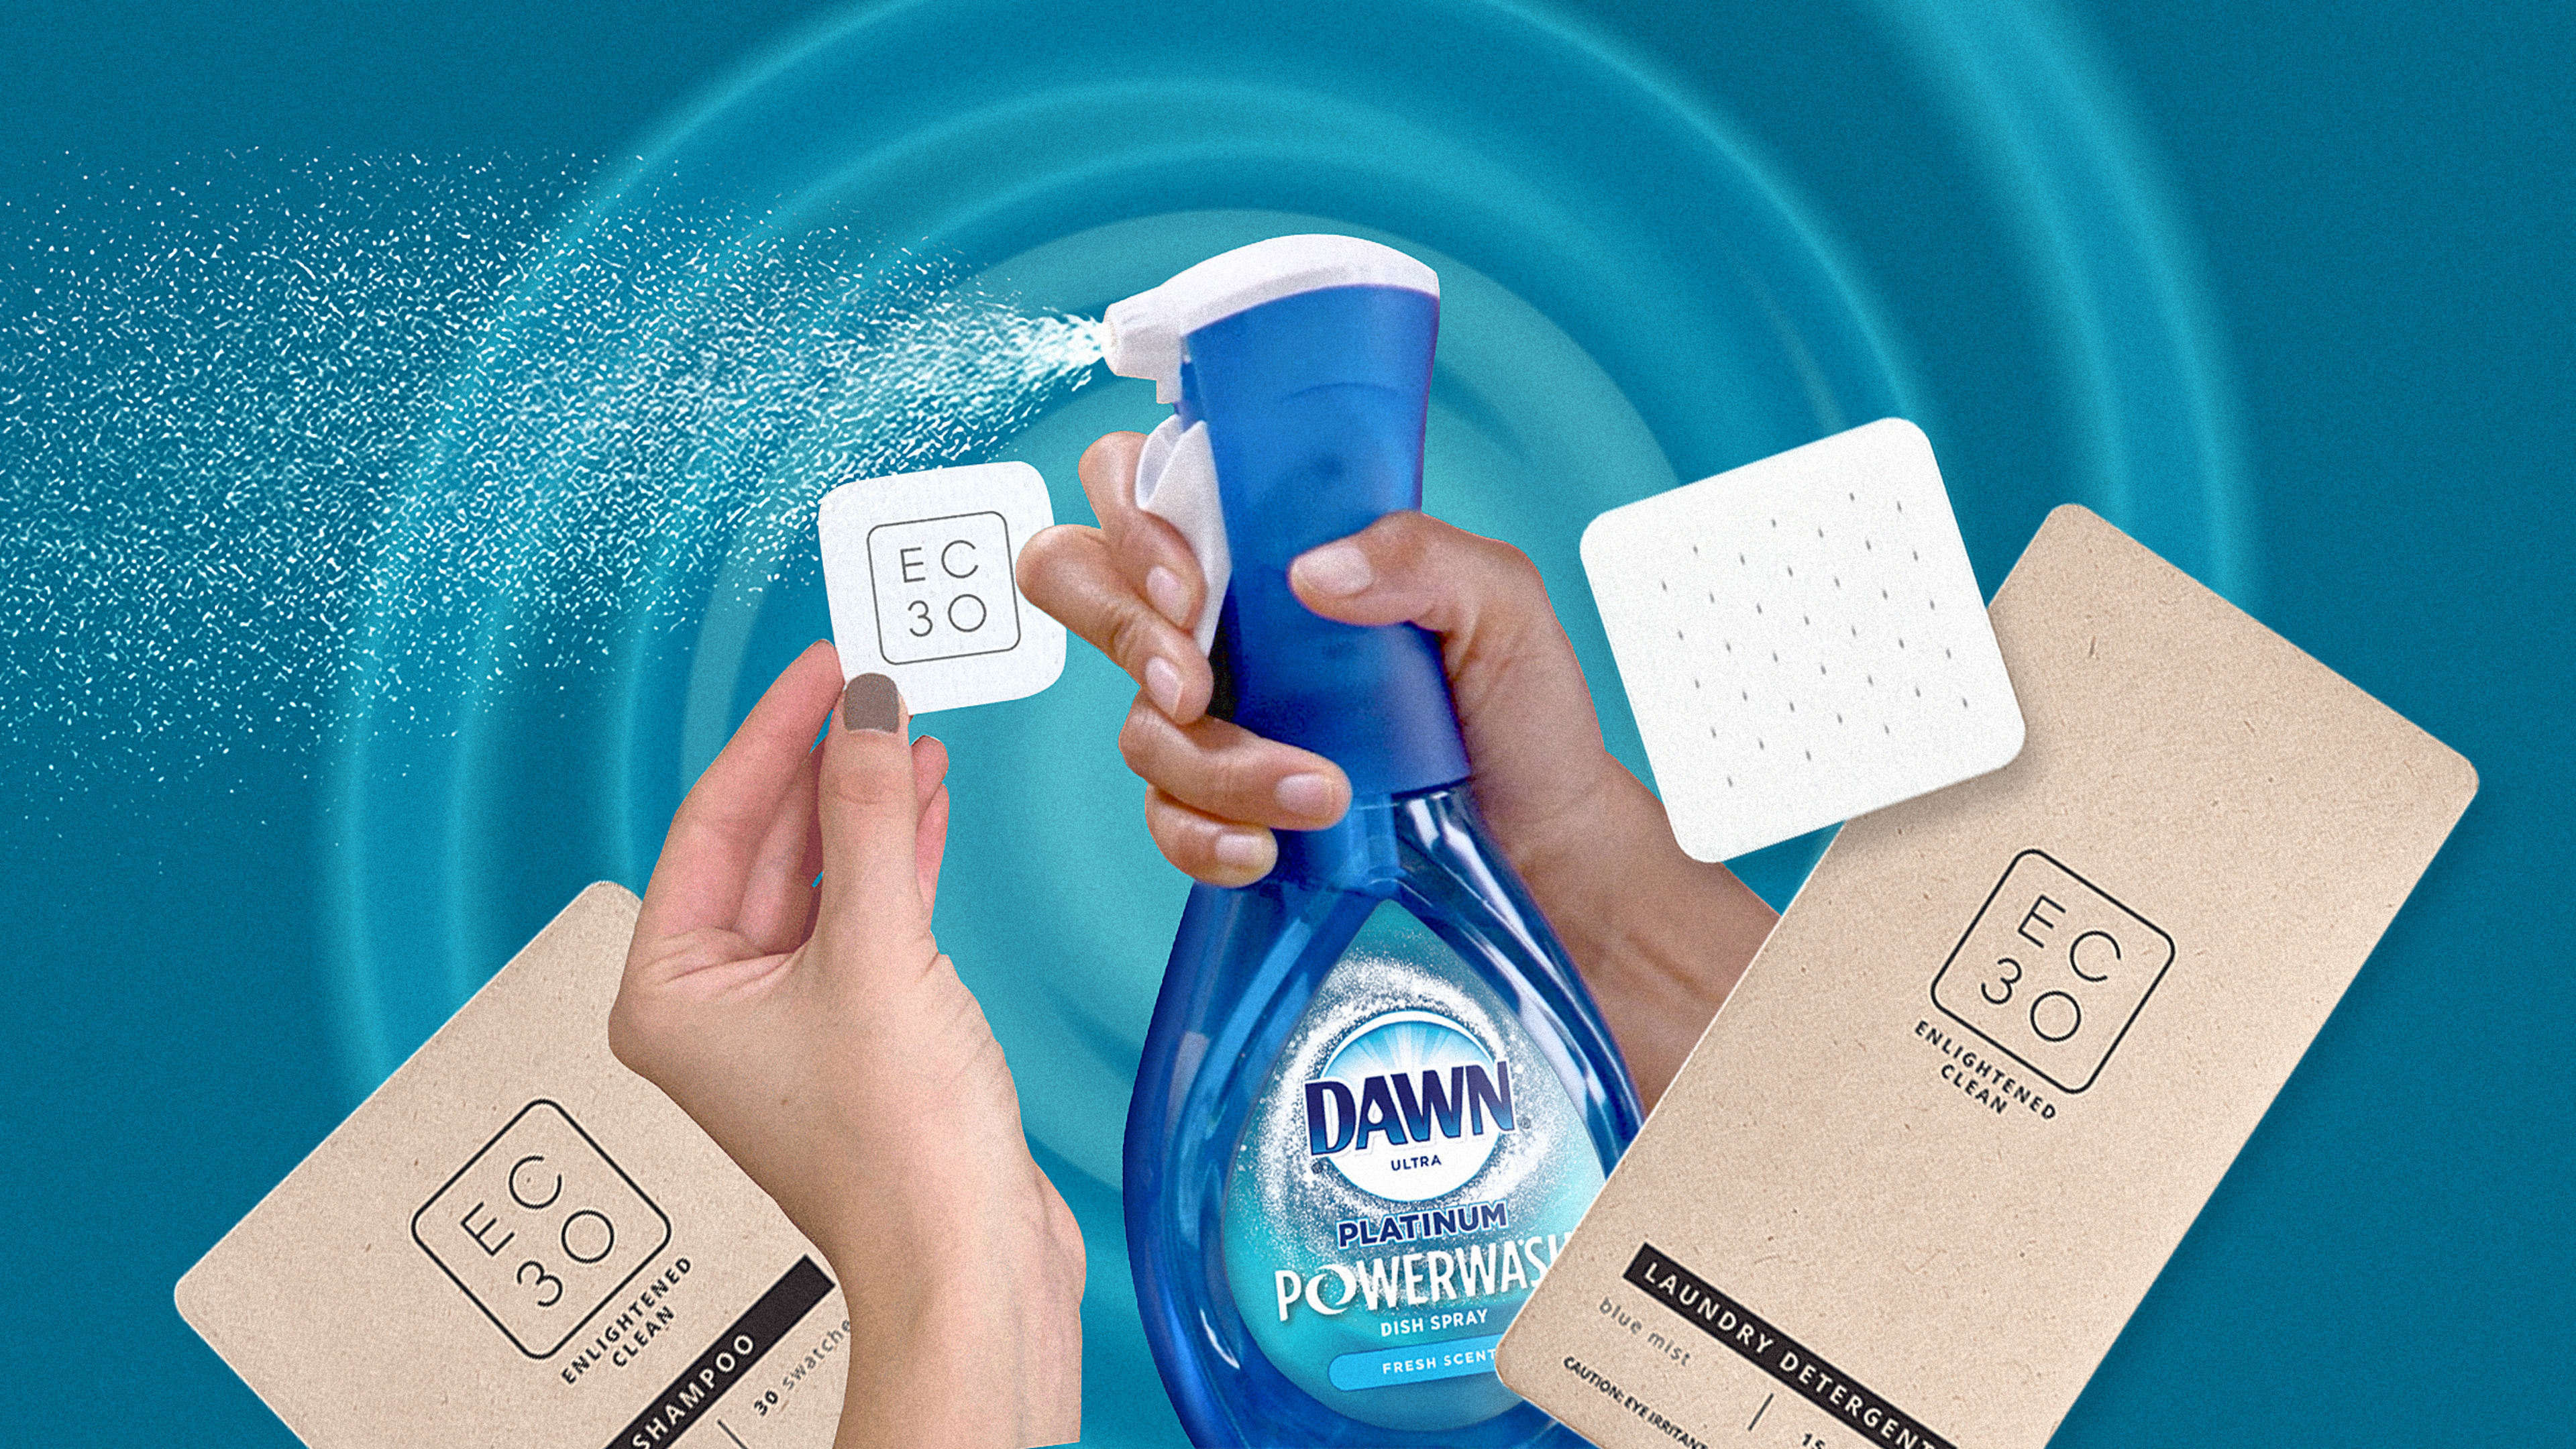 Procter & Gamble wants to reinvent how you clean your home